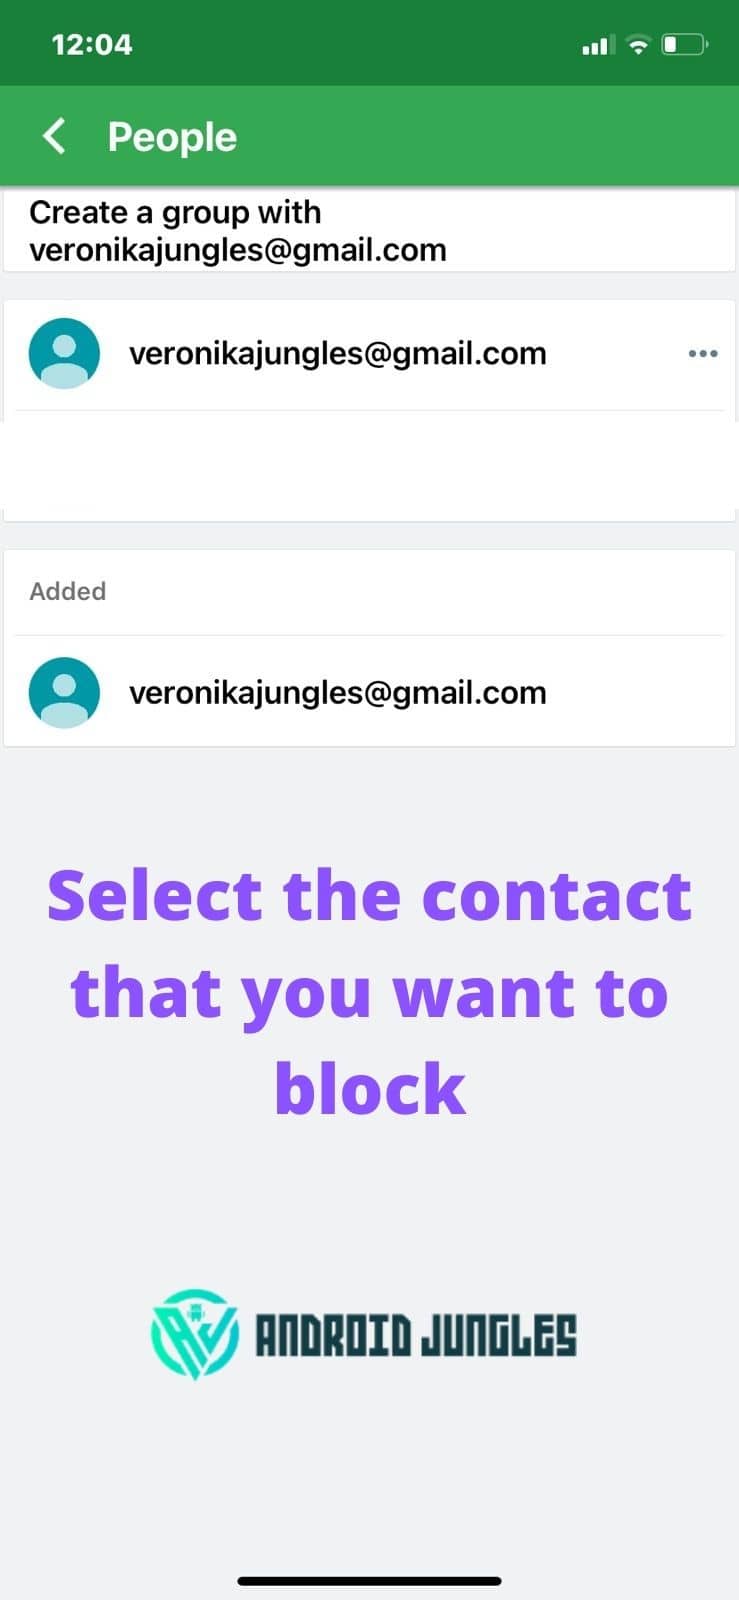 Select the contact that you want to block